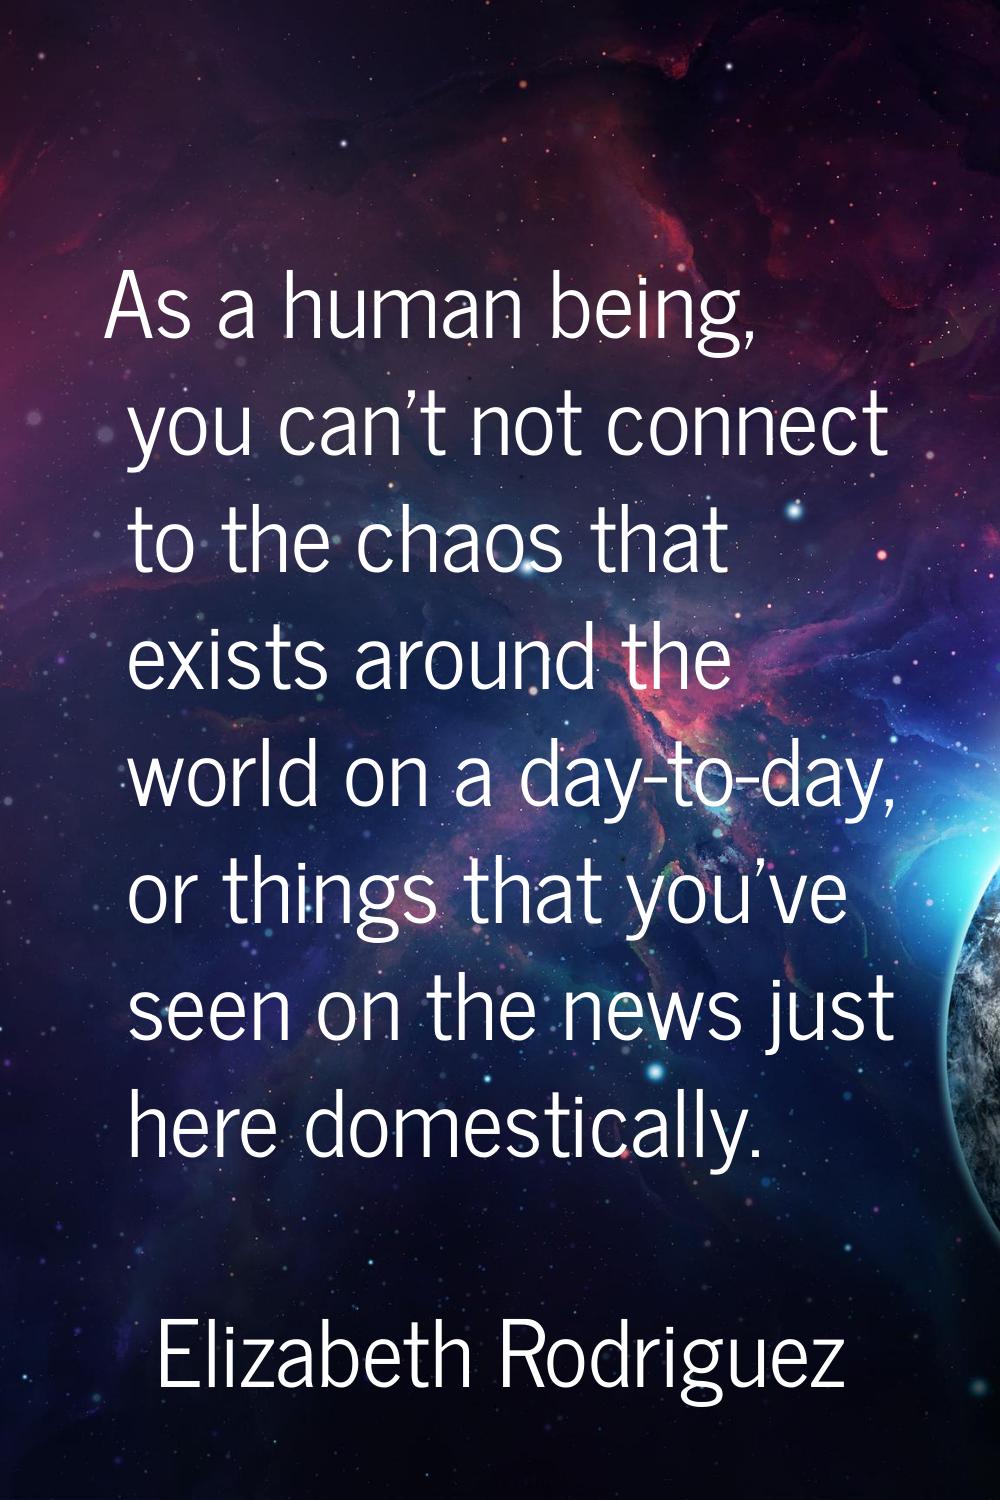 As a human being, you can't not connect to the chaos that exists around the world on a day-to-day, 